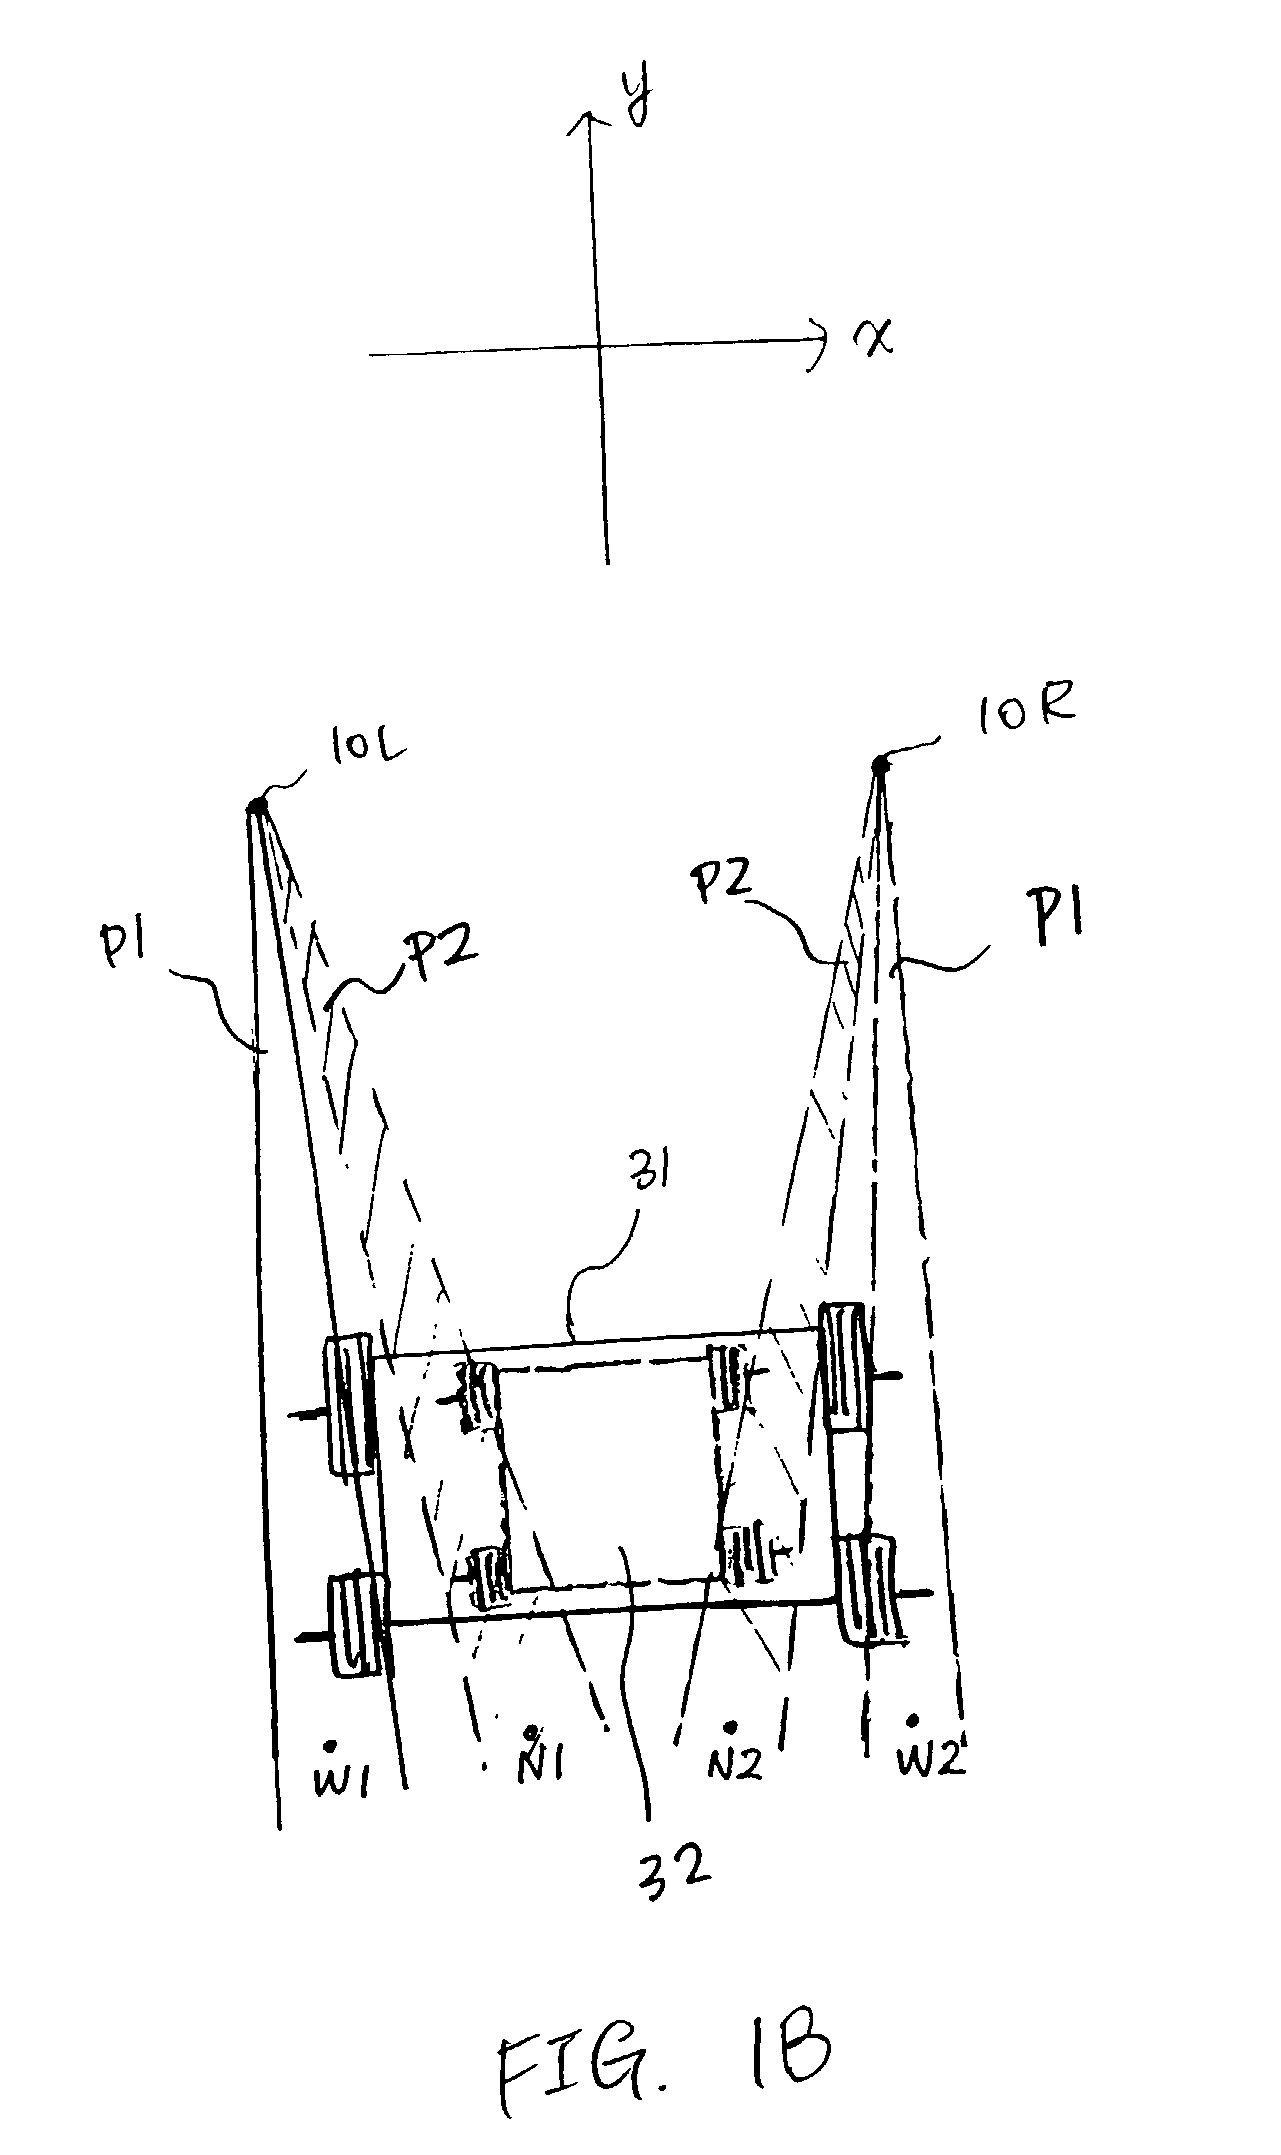 Self-calibrating position determination system